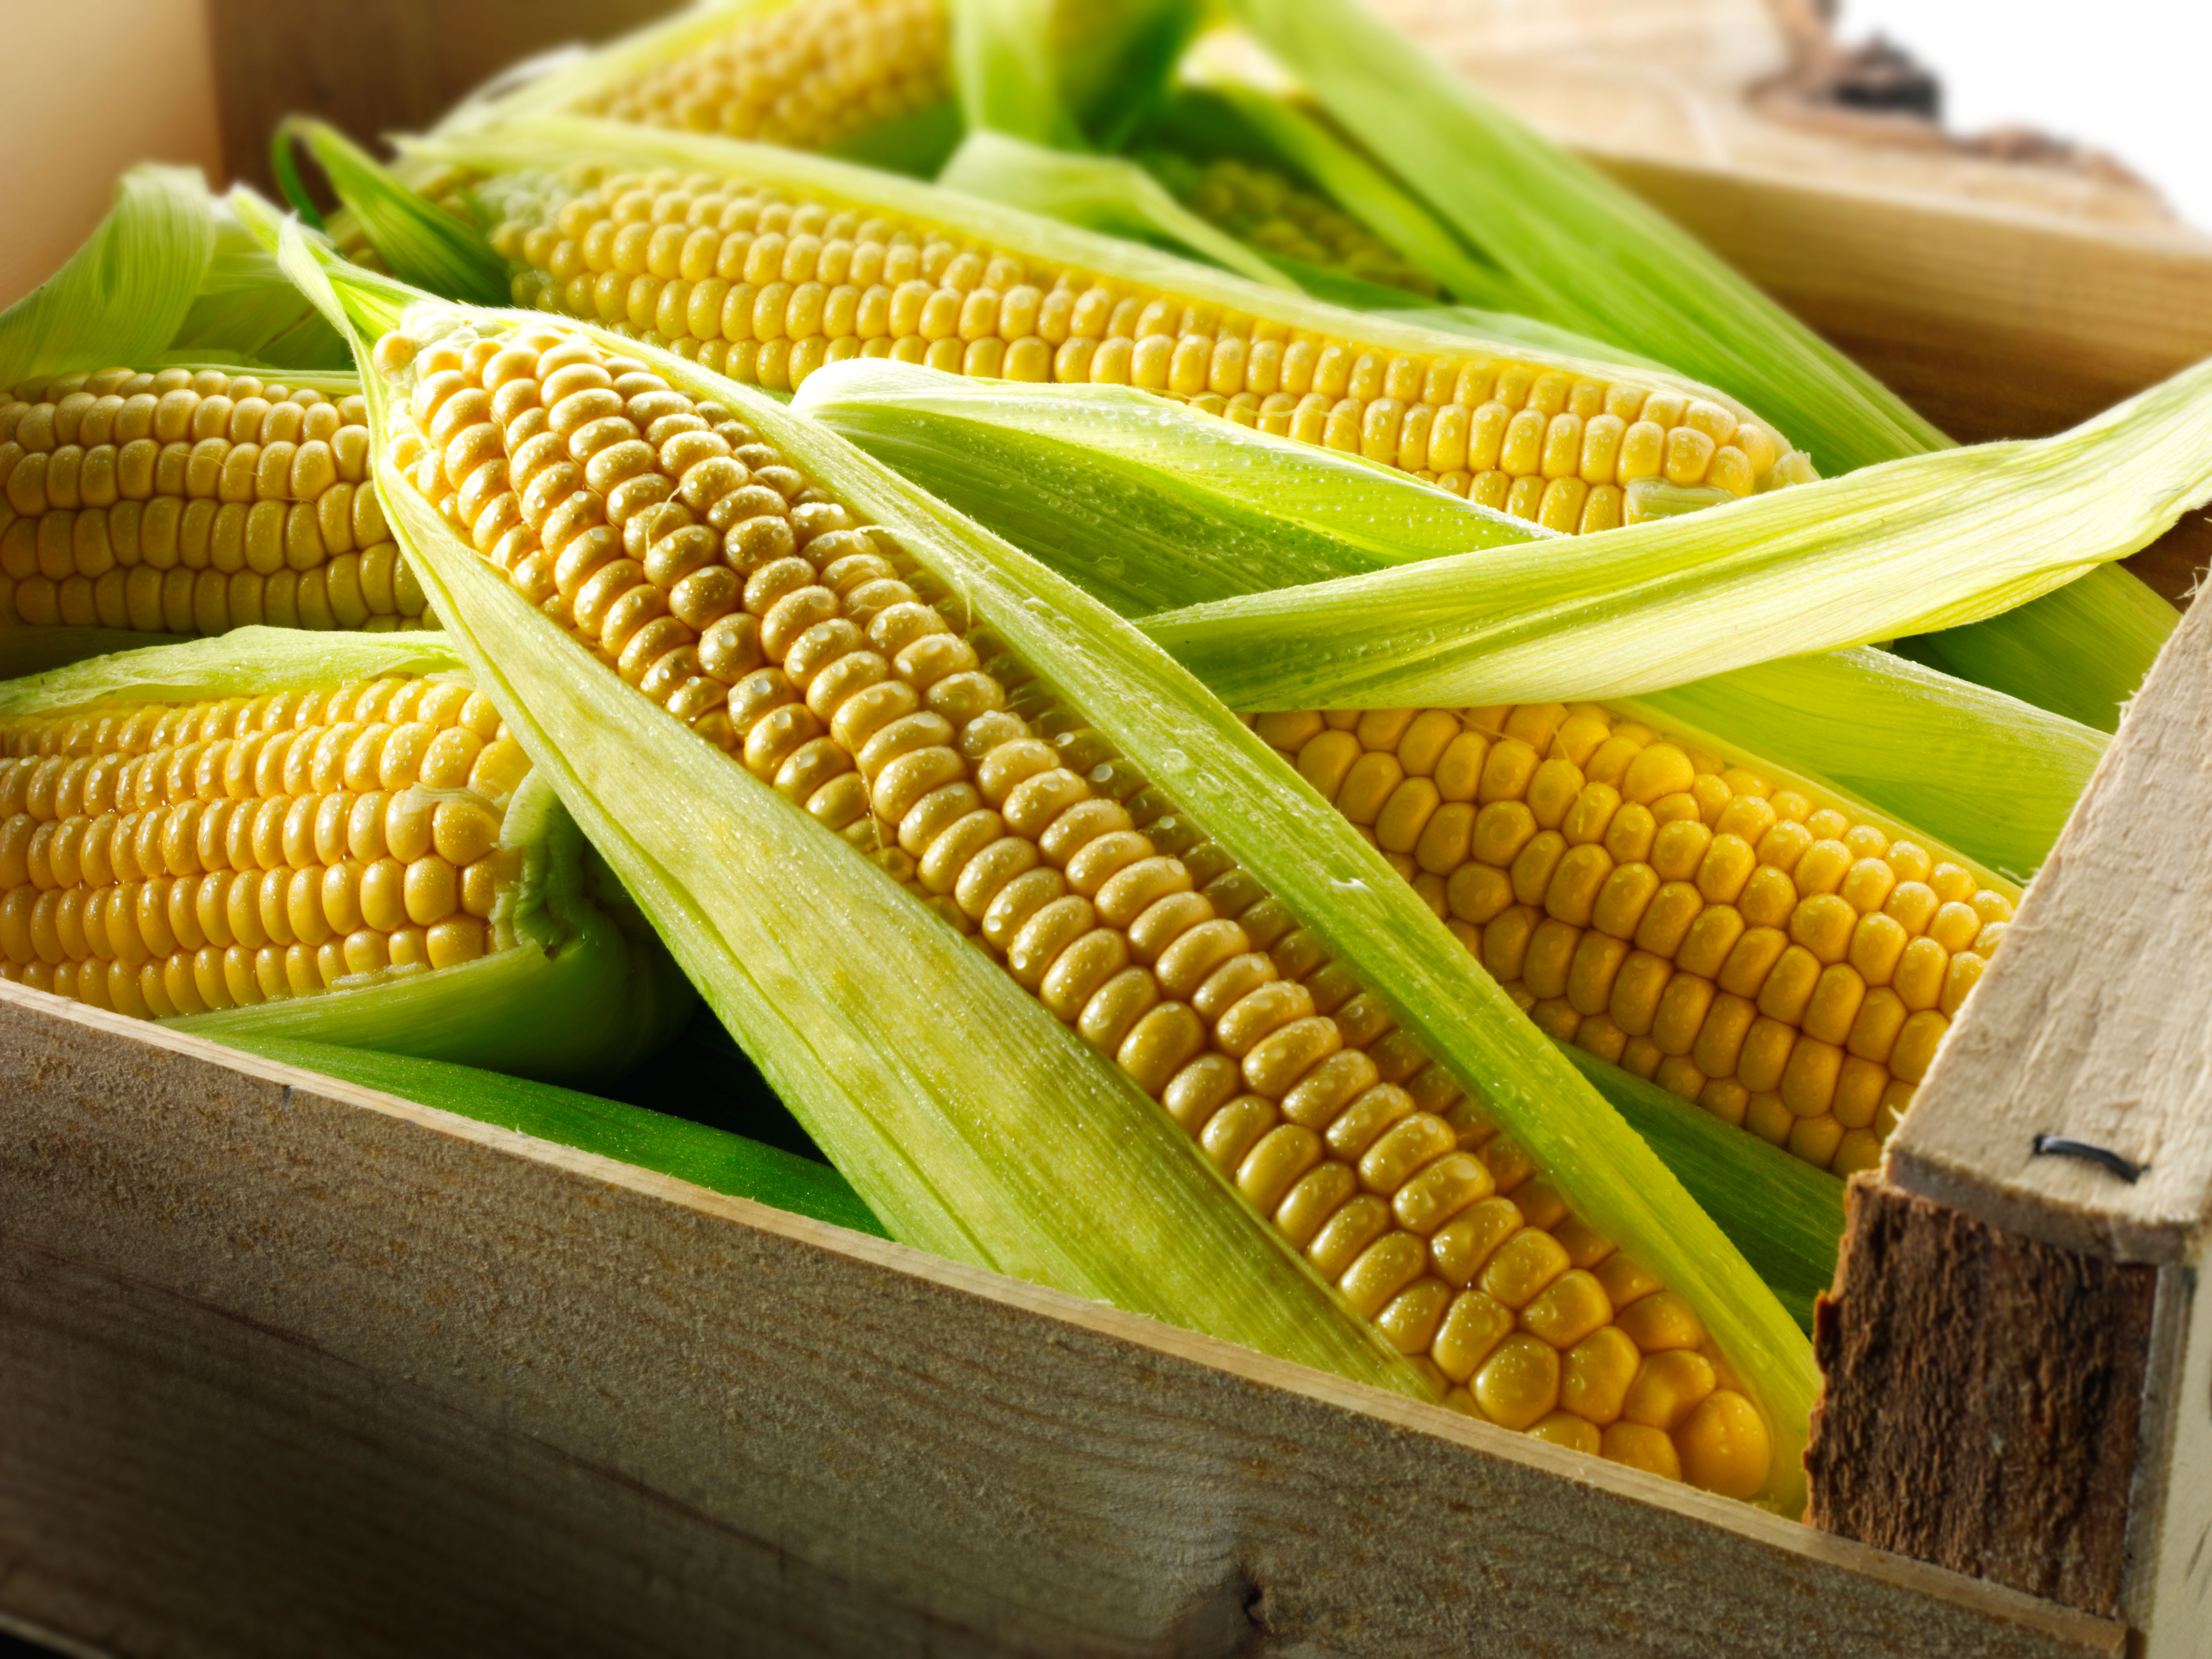 When to harvest corn: for the sweetest results